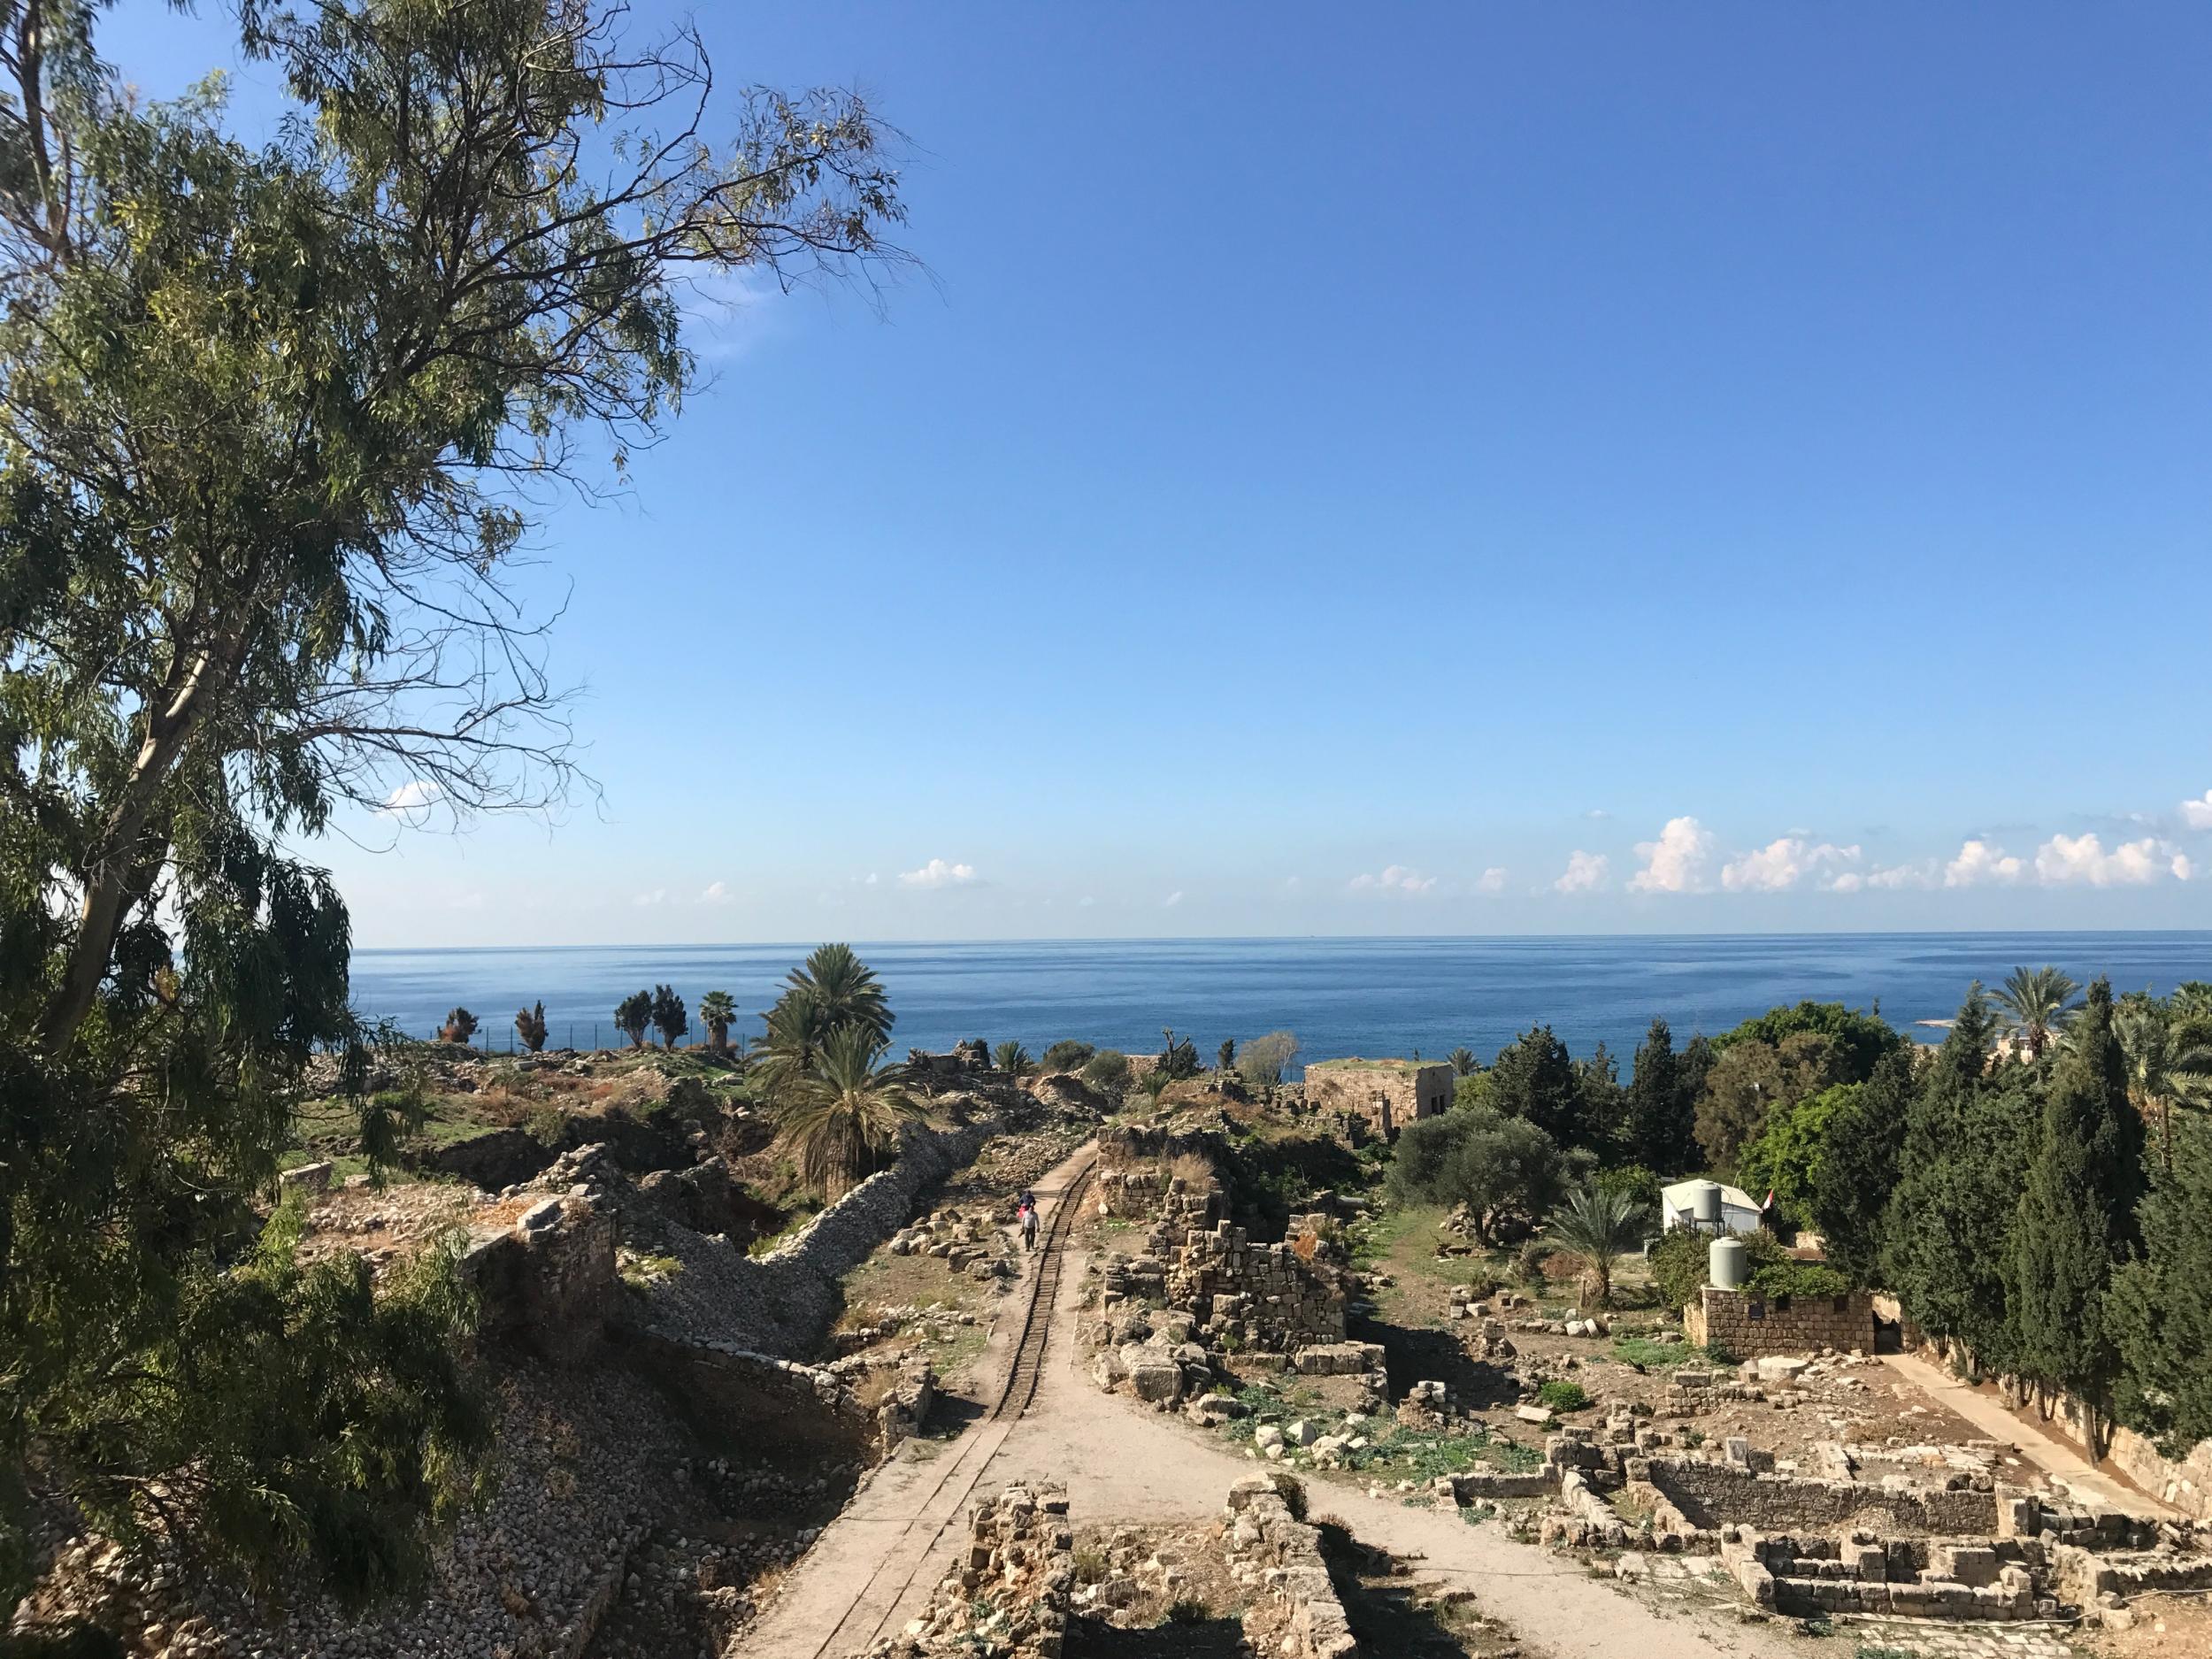 Looking out to the Mediterranean in Byblos